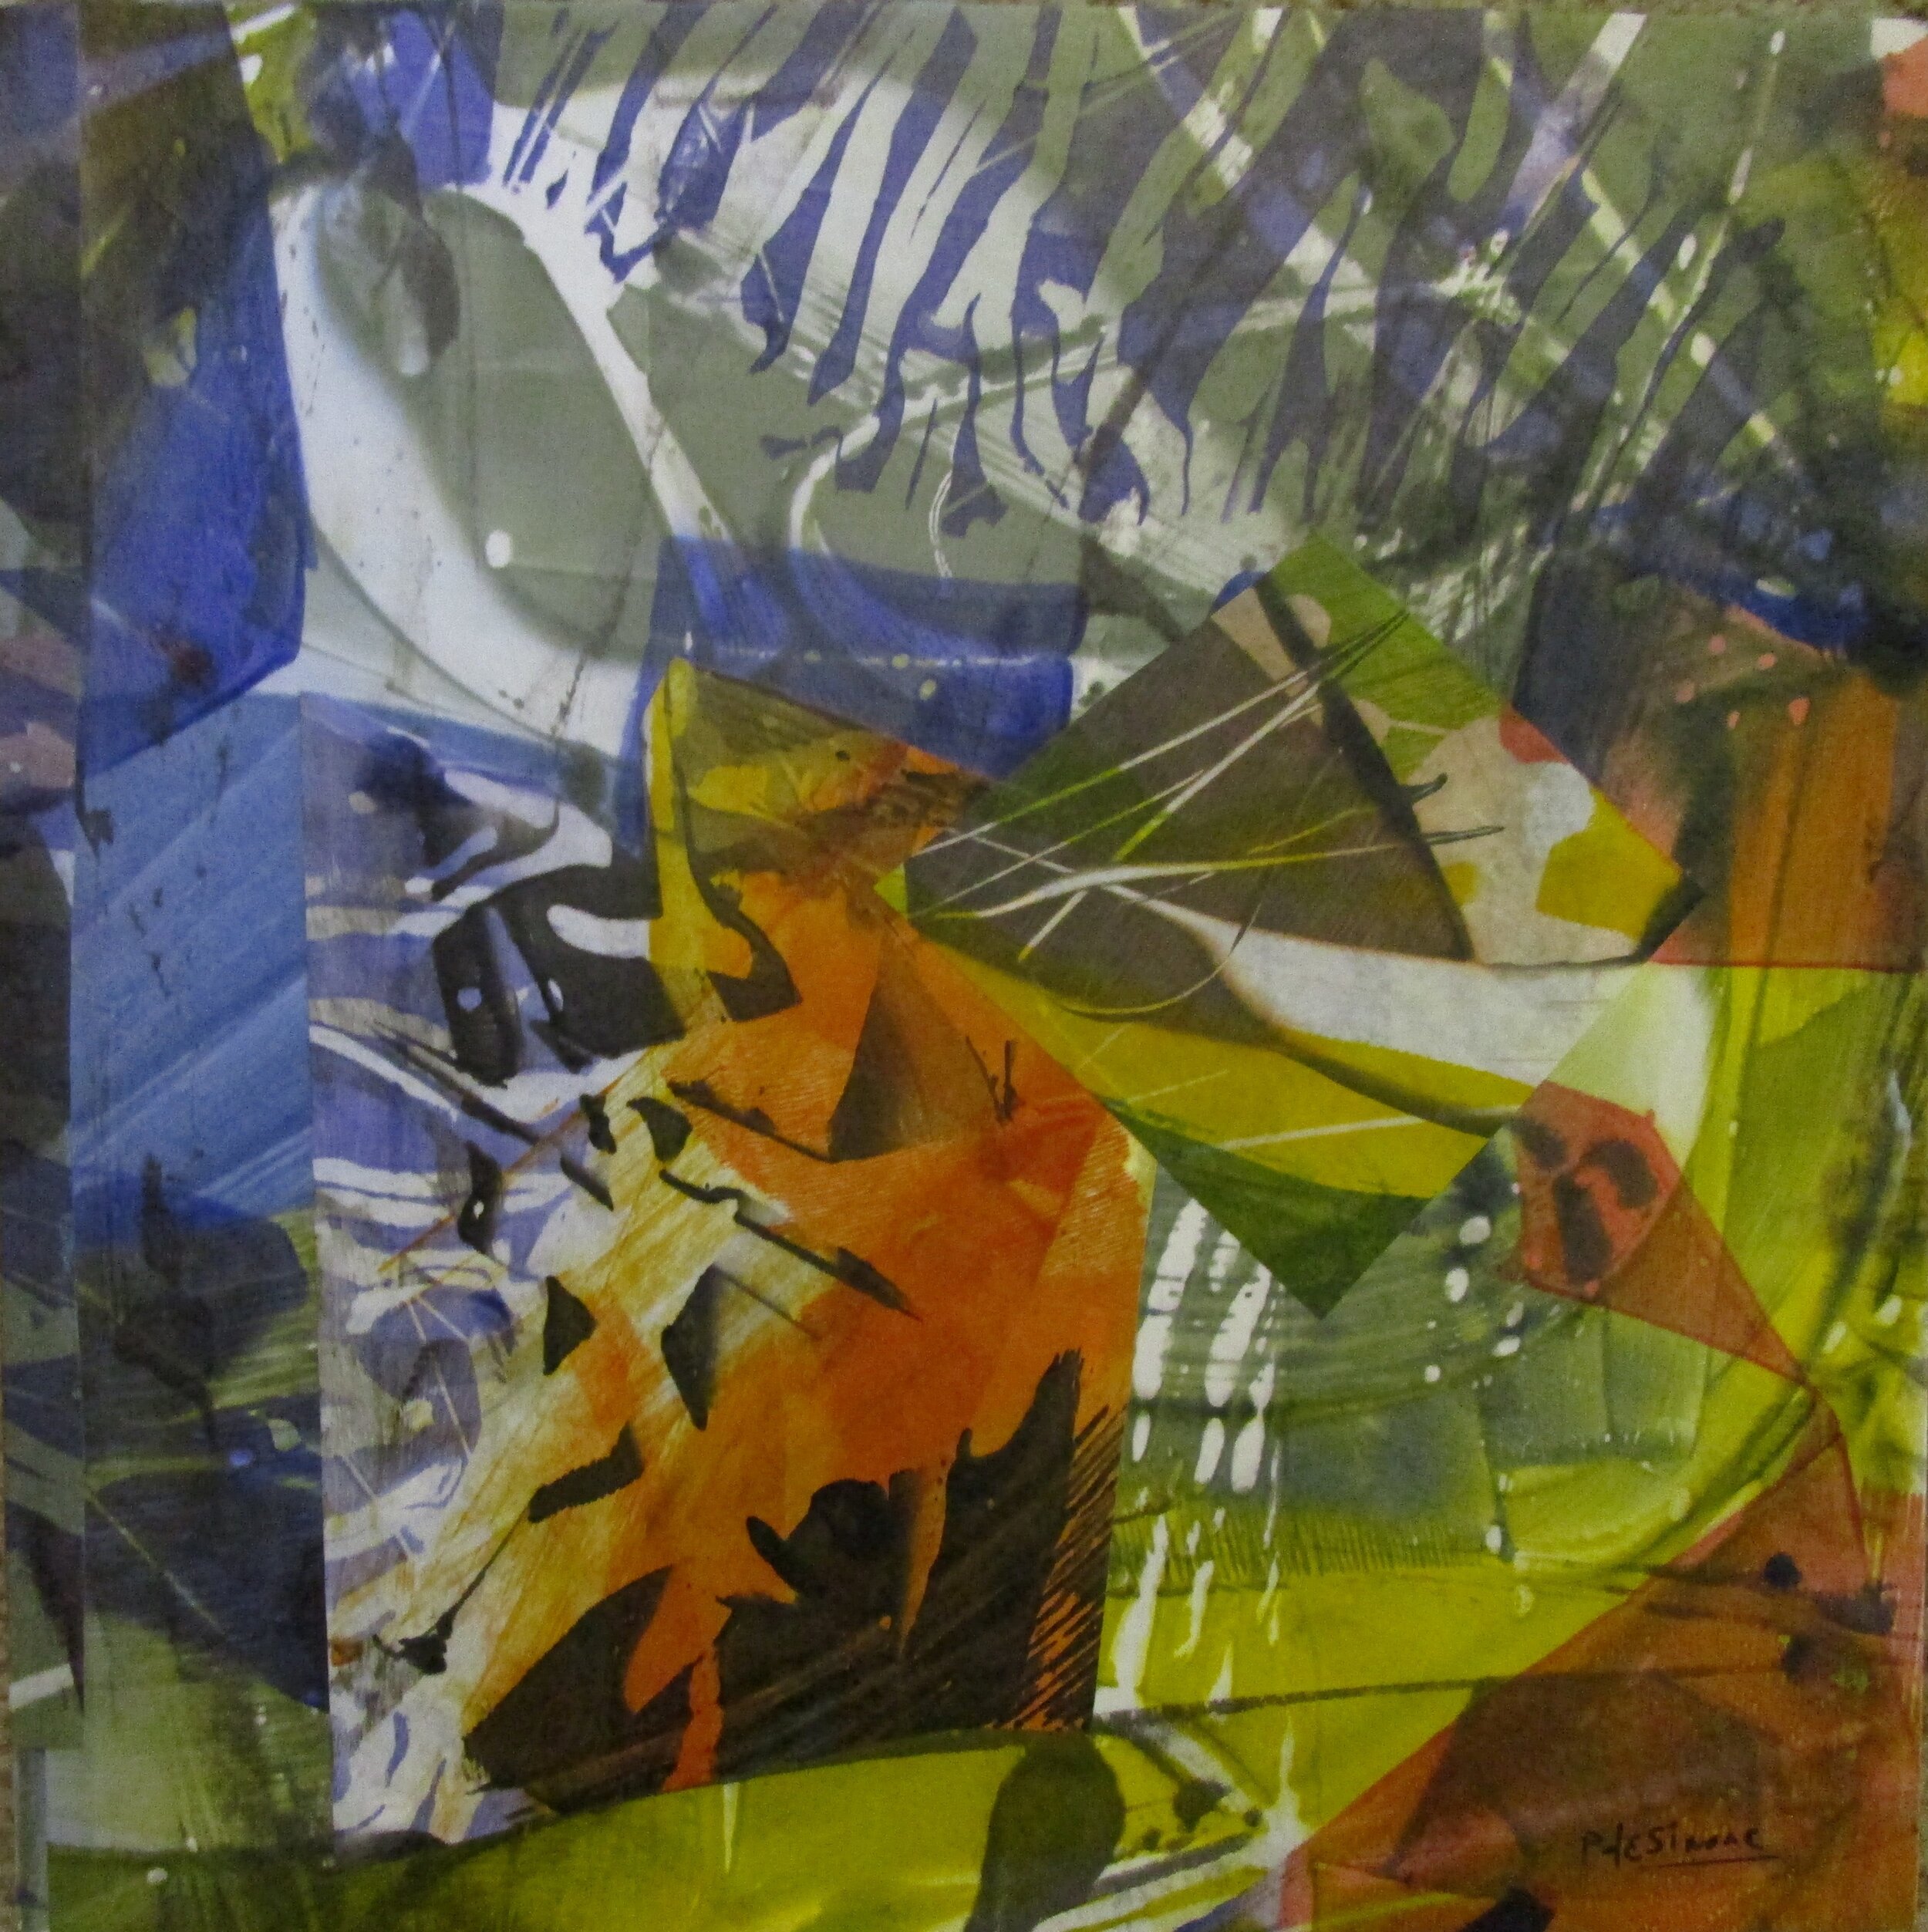 &lt;p&gt;&lt;strong&gt;PAULA DeSIMONE&lt;/strong&gt;monotype collage with beeswax&lt;a href="/paula-desimone-ill2020"&gt;More →&lt;/a&gt;&lt;/p&gt; 